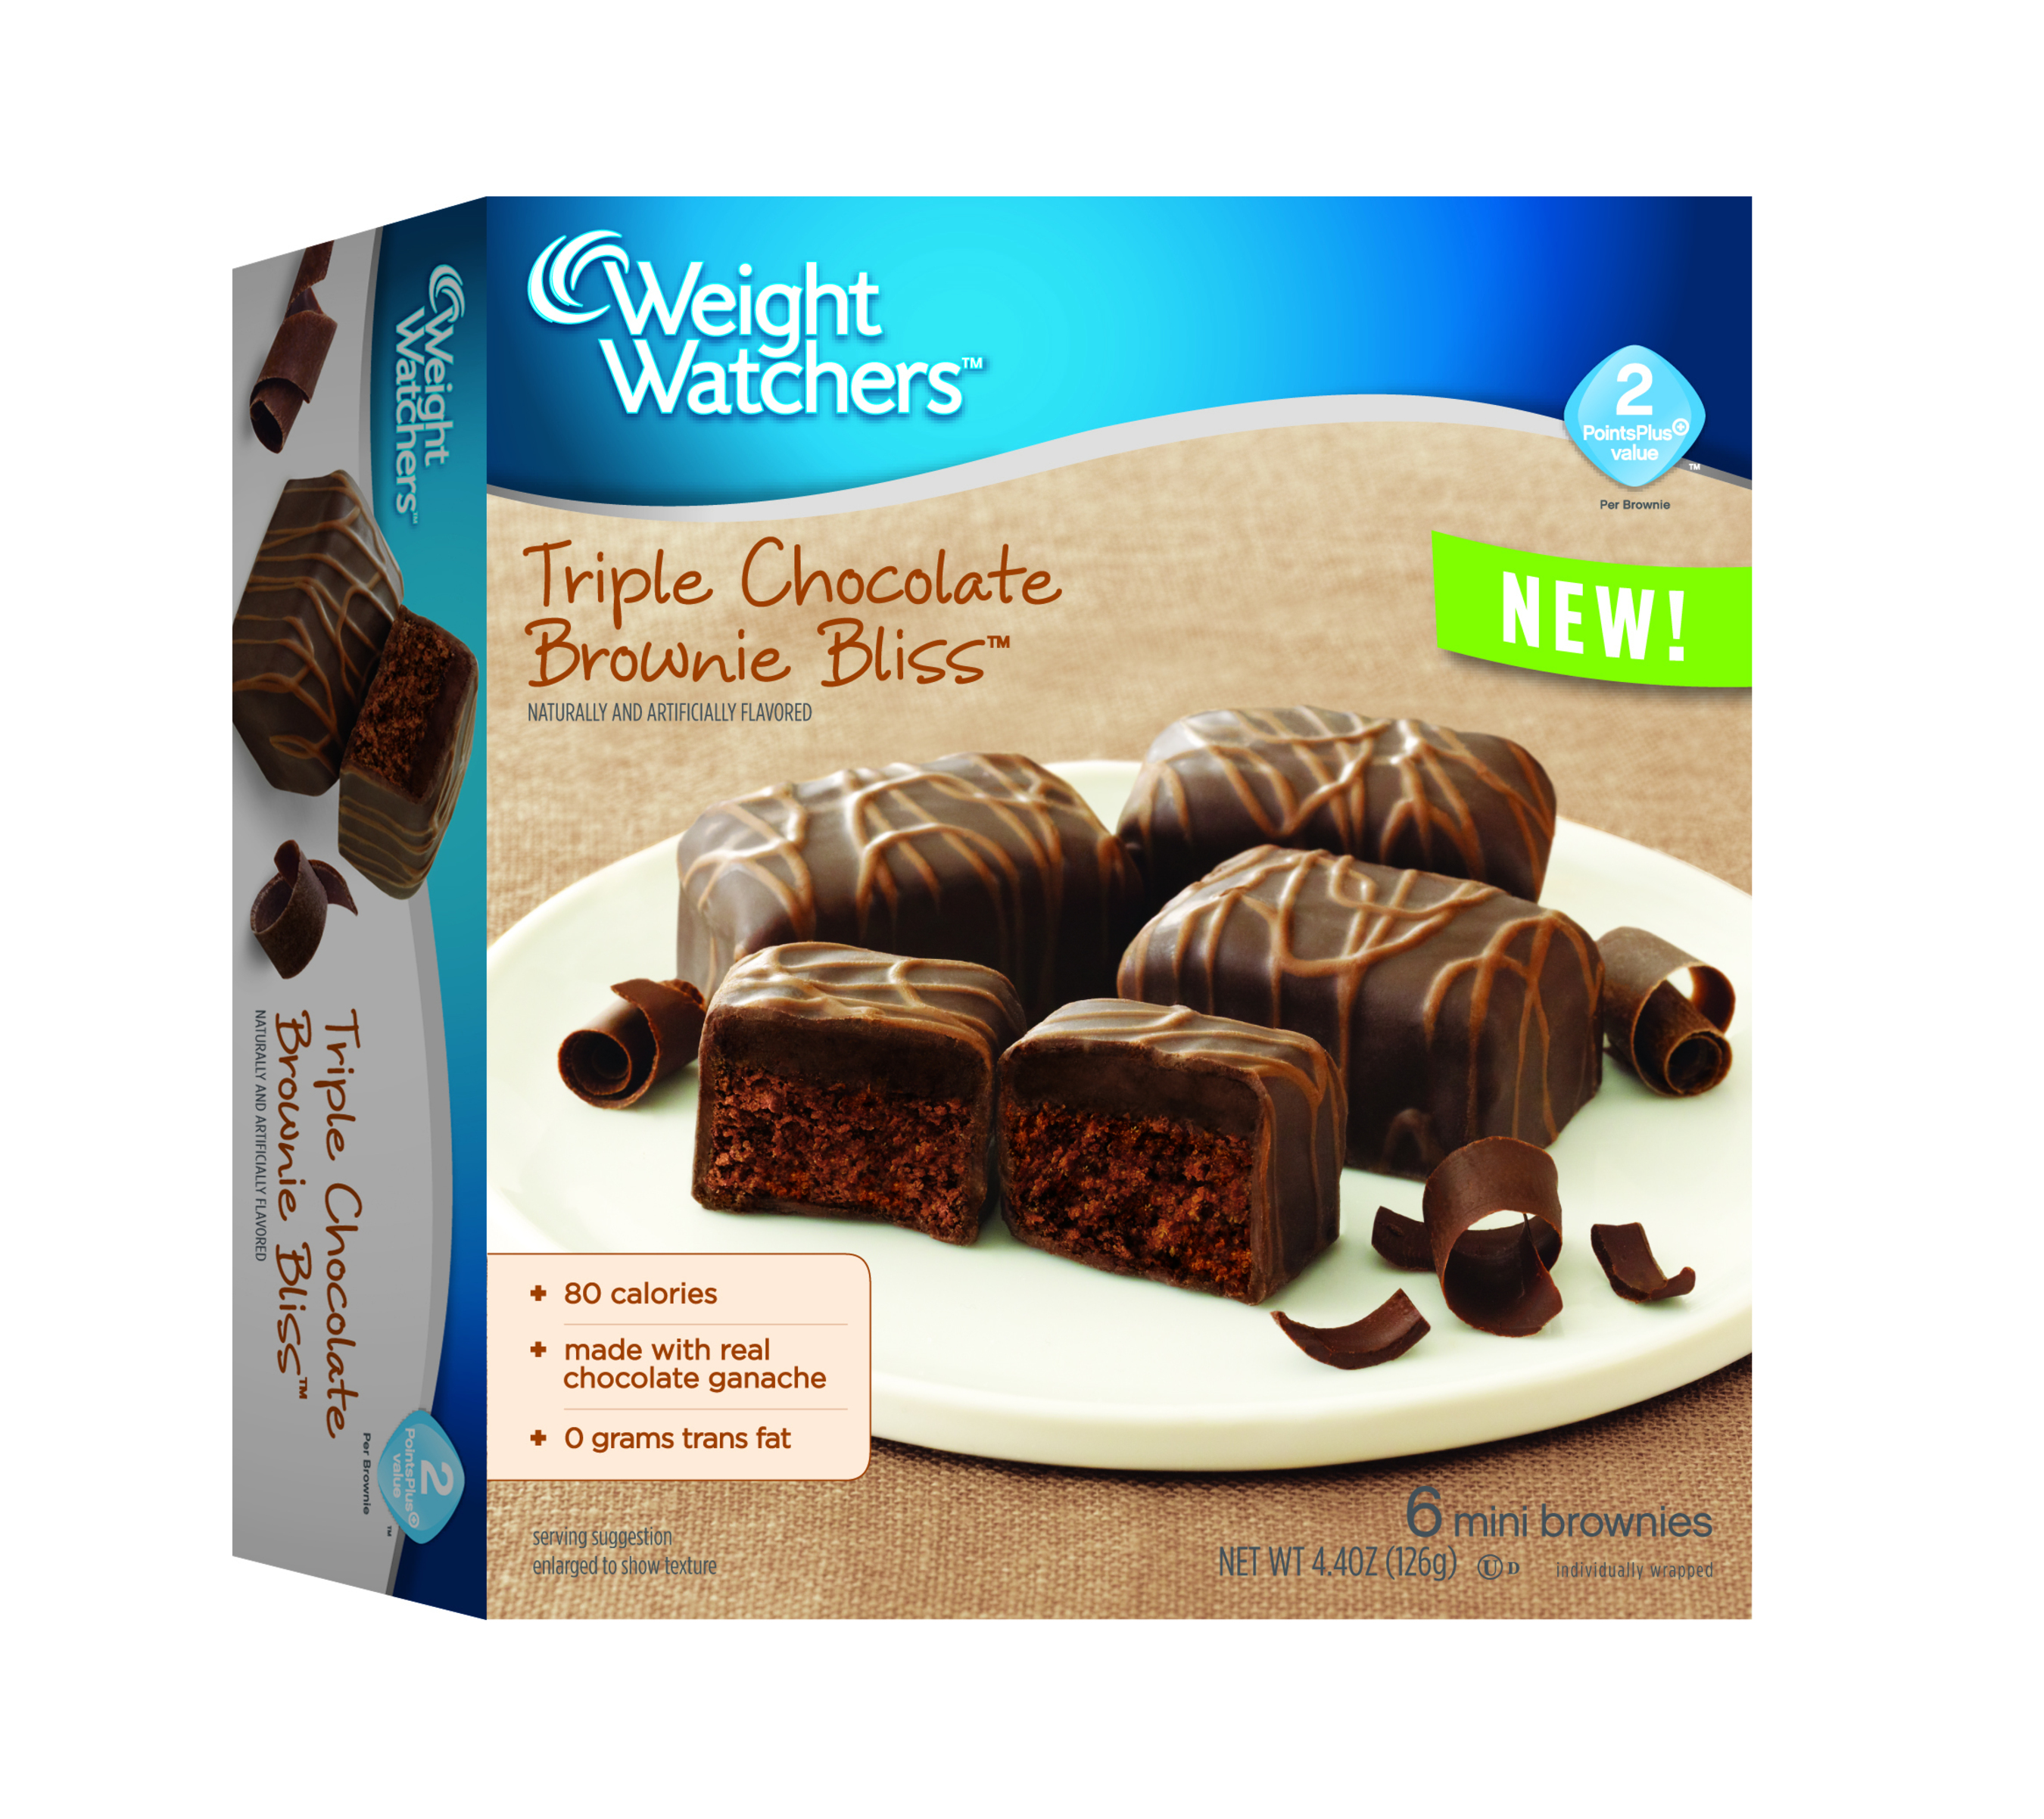 Triple Chocolate Brownie Bliss(TM) is a decadent brownie, layered with rich, real chocolate ganache and covered in a chocolaty coating. (PRNewsFoto/Weight Watchers Sweet Baked Good)